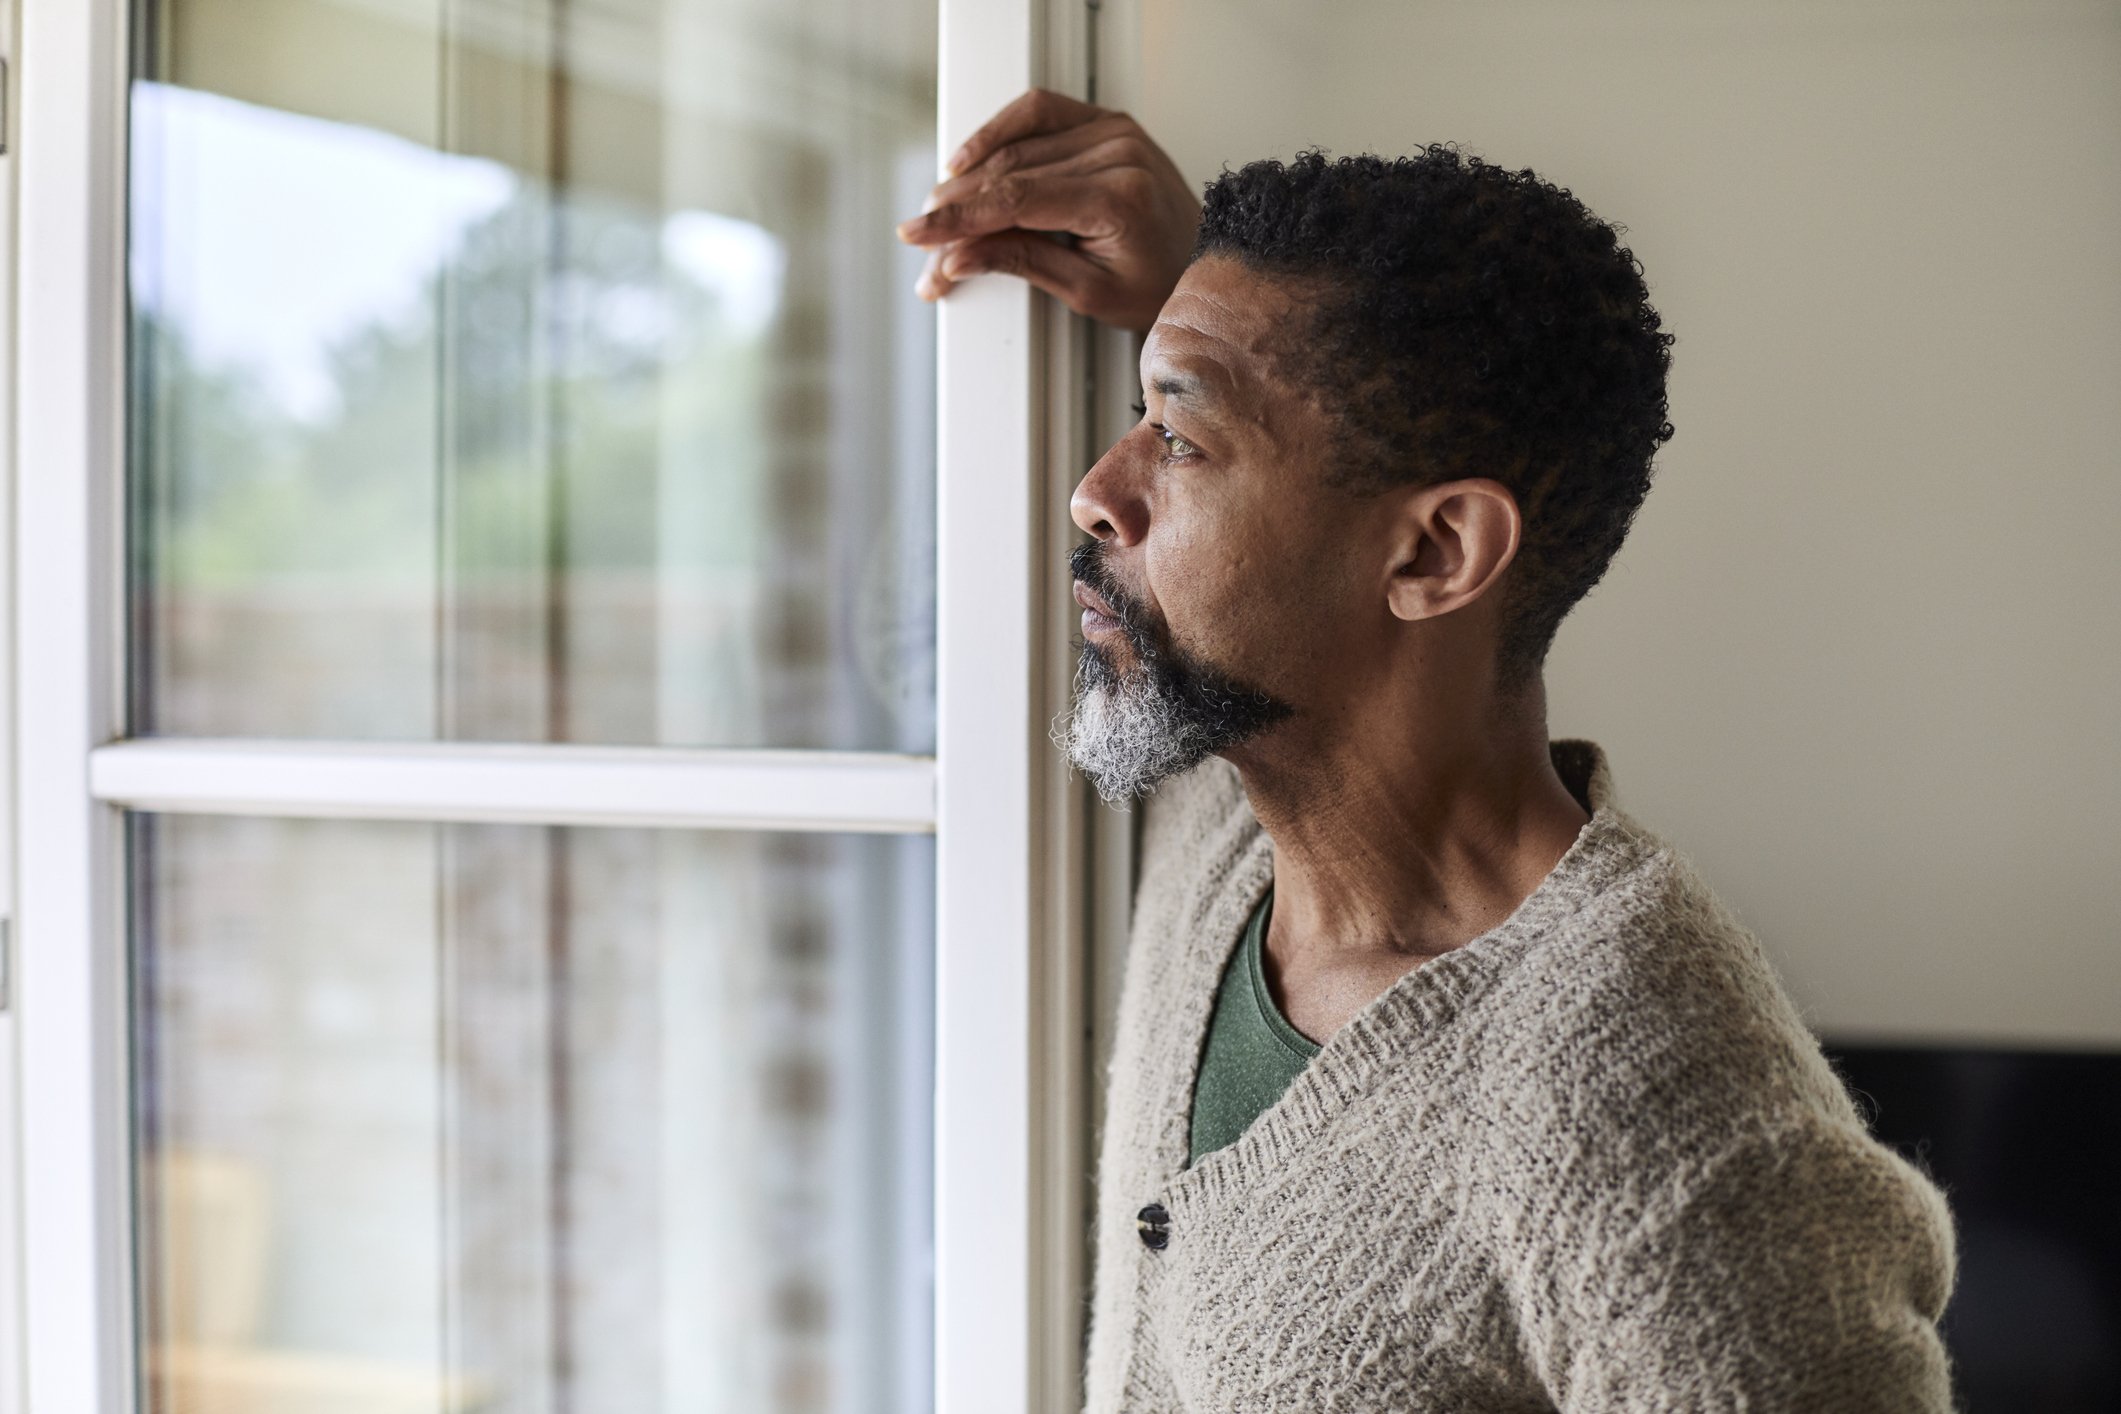 A worried man looks out the window in deep thought. | Photo: Getty Images